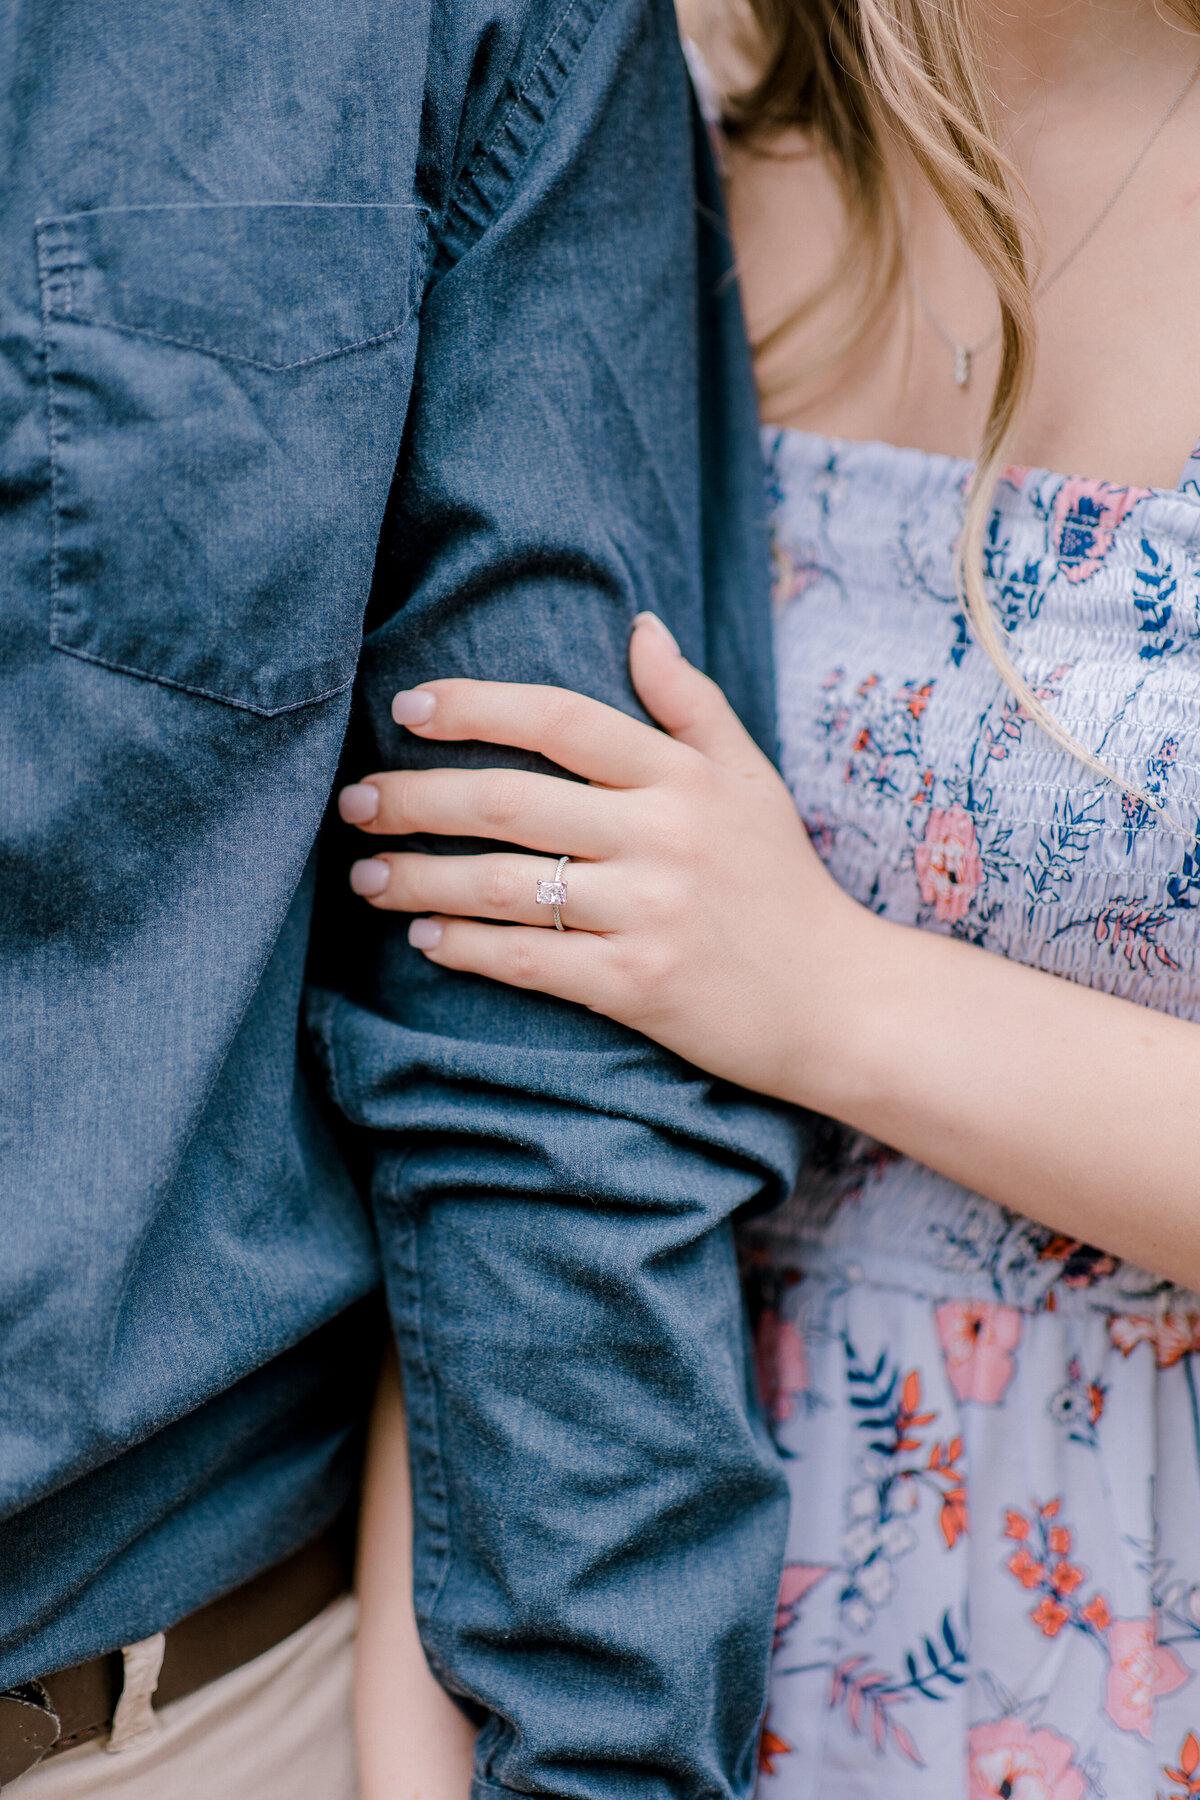 Hershey Garden Engagement Session Photography Photo-20